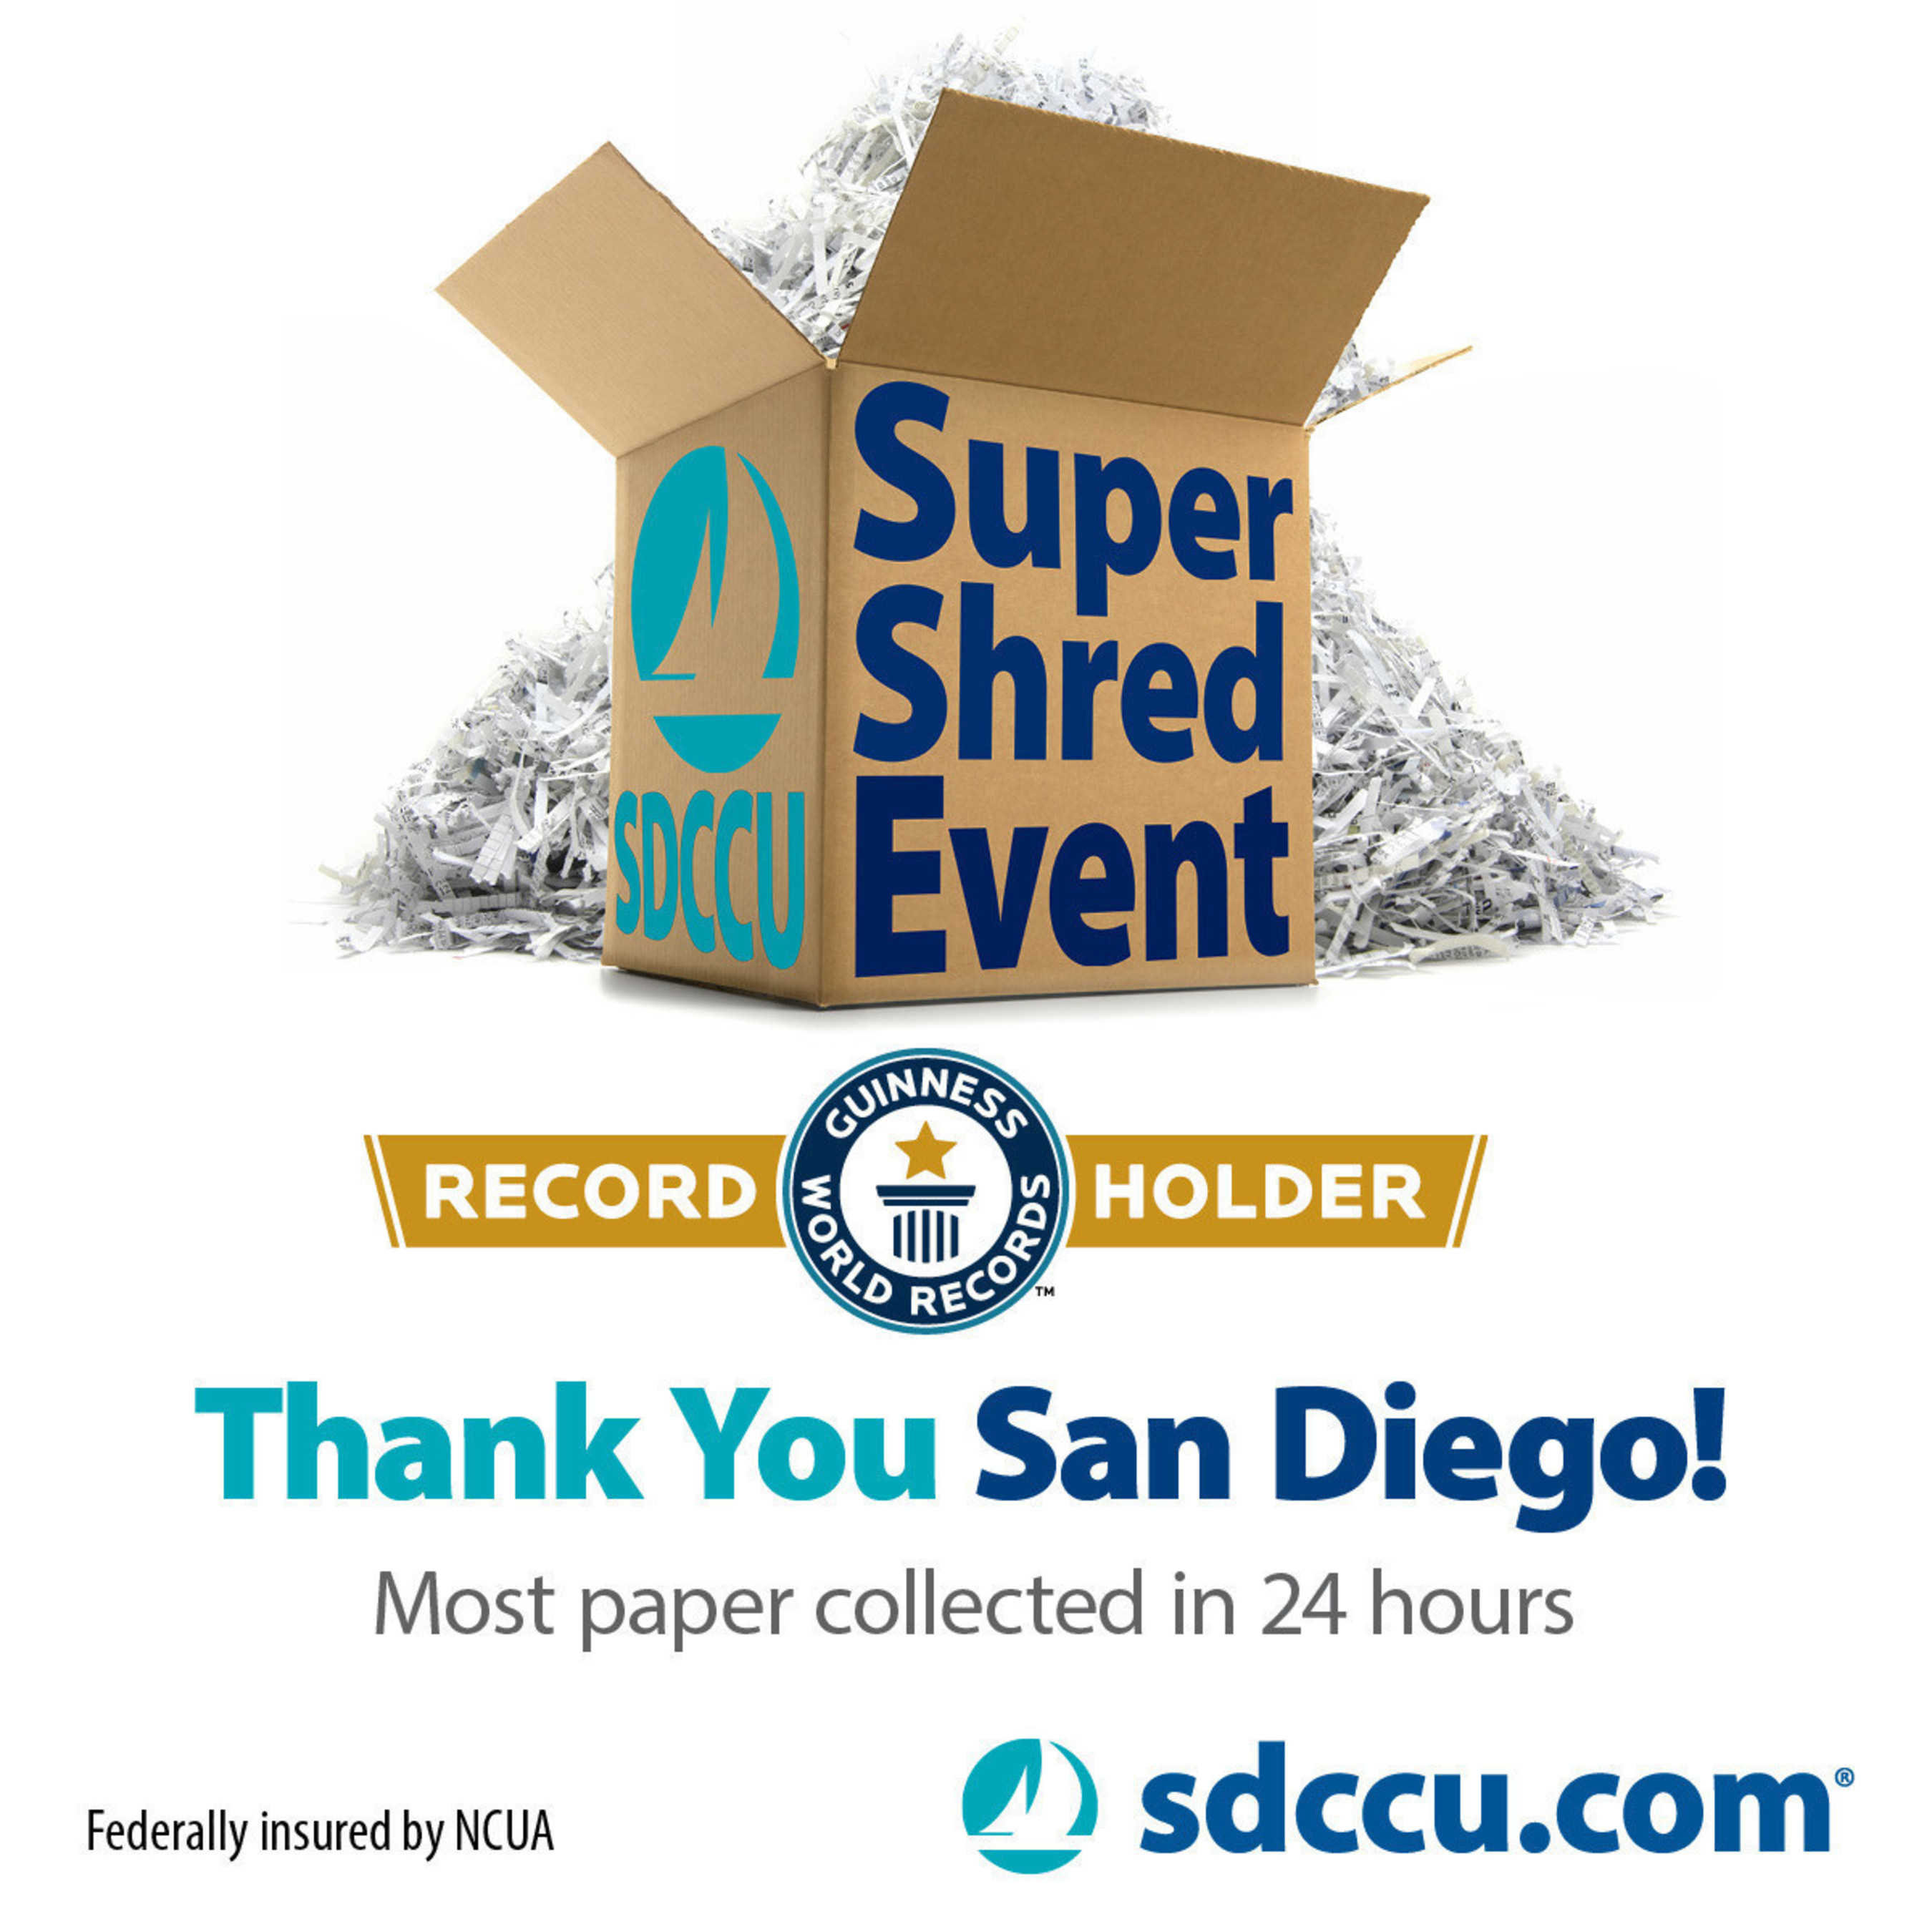 Thanks to the efforts of Team SDCCU and our partners in the community, we broke our existing GUINNESS WORLD RECORDS(TM) title at the 2016 SDCCU Super Shred Event, collecting, shredding and recycling an incredible 589,251 pounds of paper! More than 12,000 people turned out at Qualcomm(R)